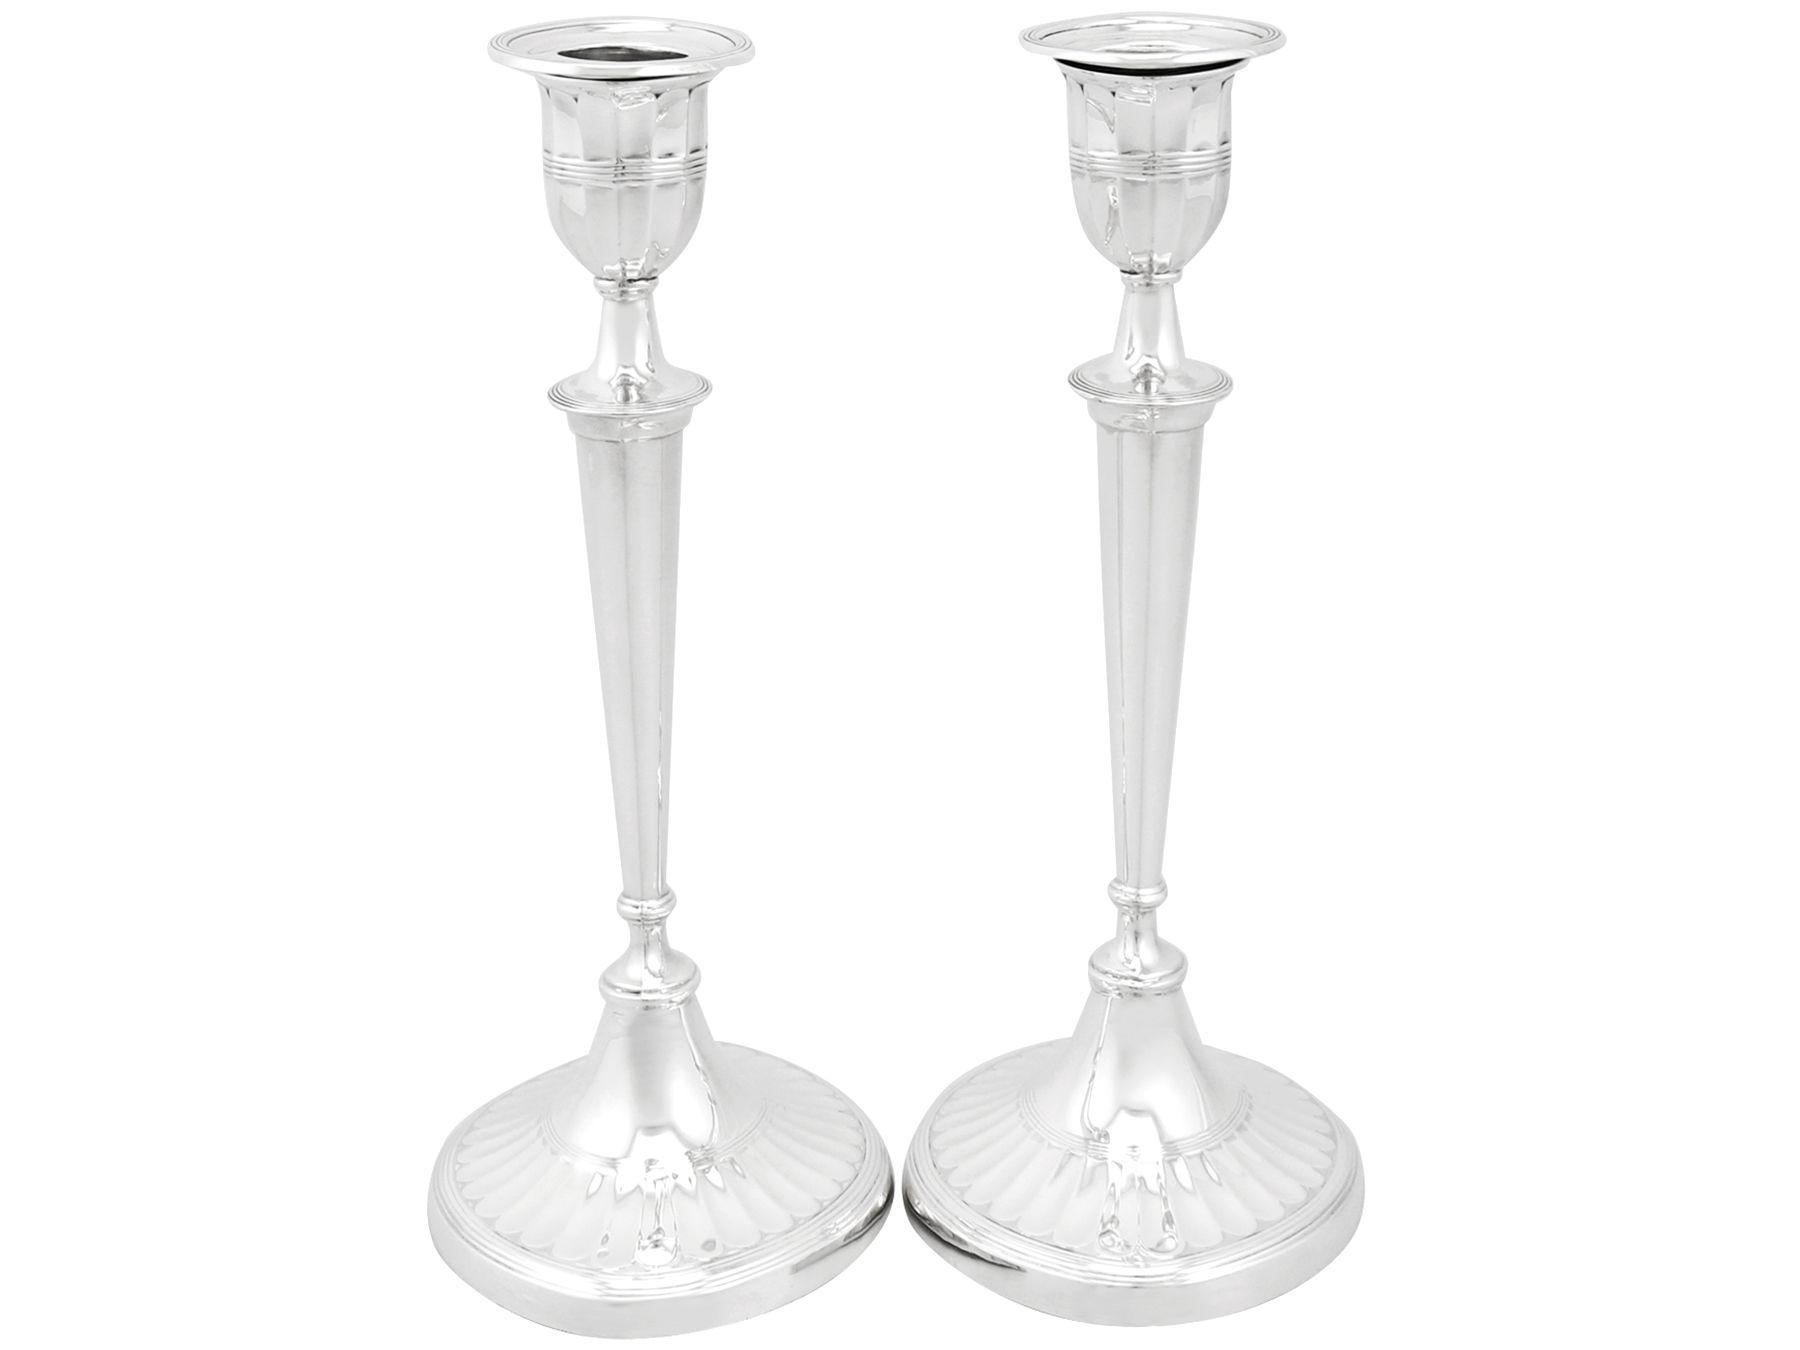 An exceptional, fine and impressive pair of antique Edwardian English sterling silver candlesticks in the Adams style; an addition to our ornamental silverware collection.

These impressive antique Edwardian sterling silver candlesticks have an